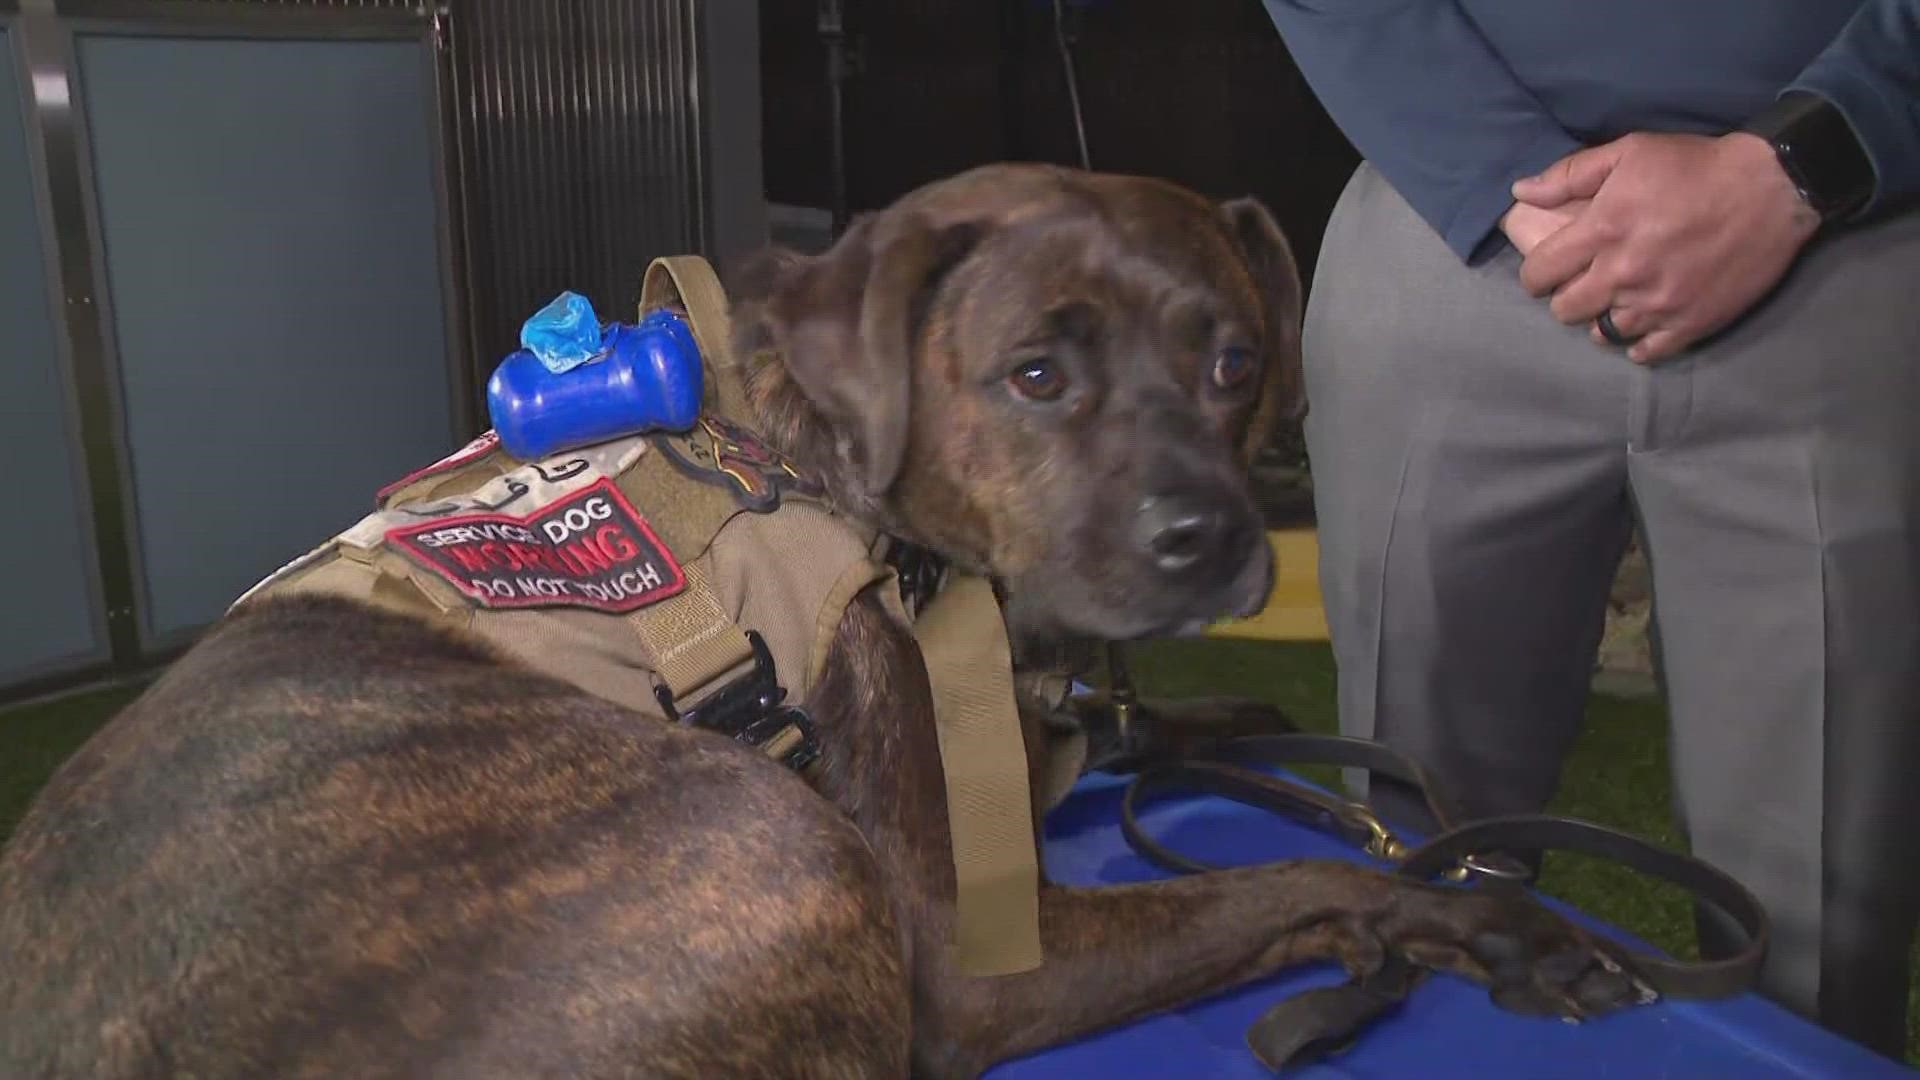 The nation's largest provider of trained service dogs to military veterans is partnering with 12News to help keep the program going.